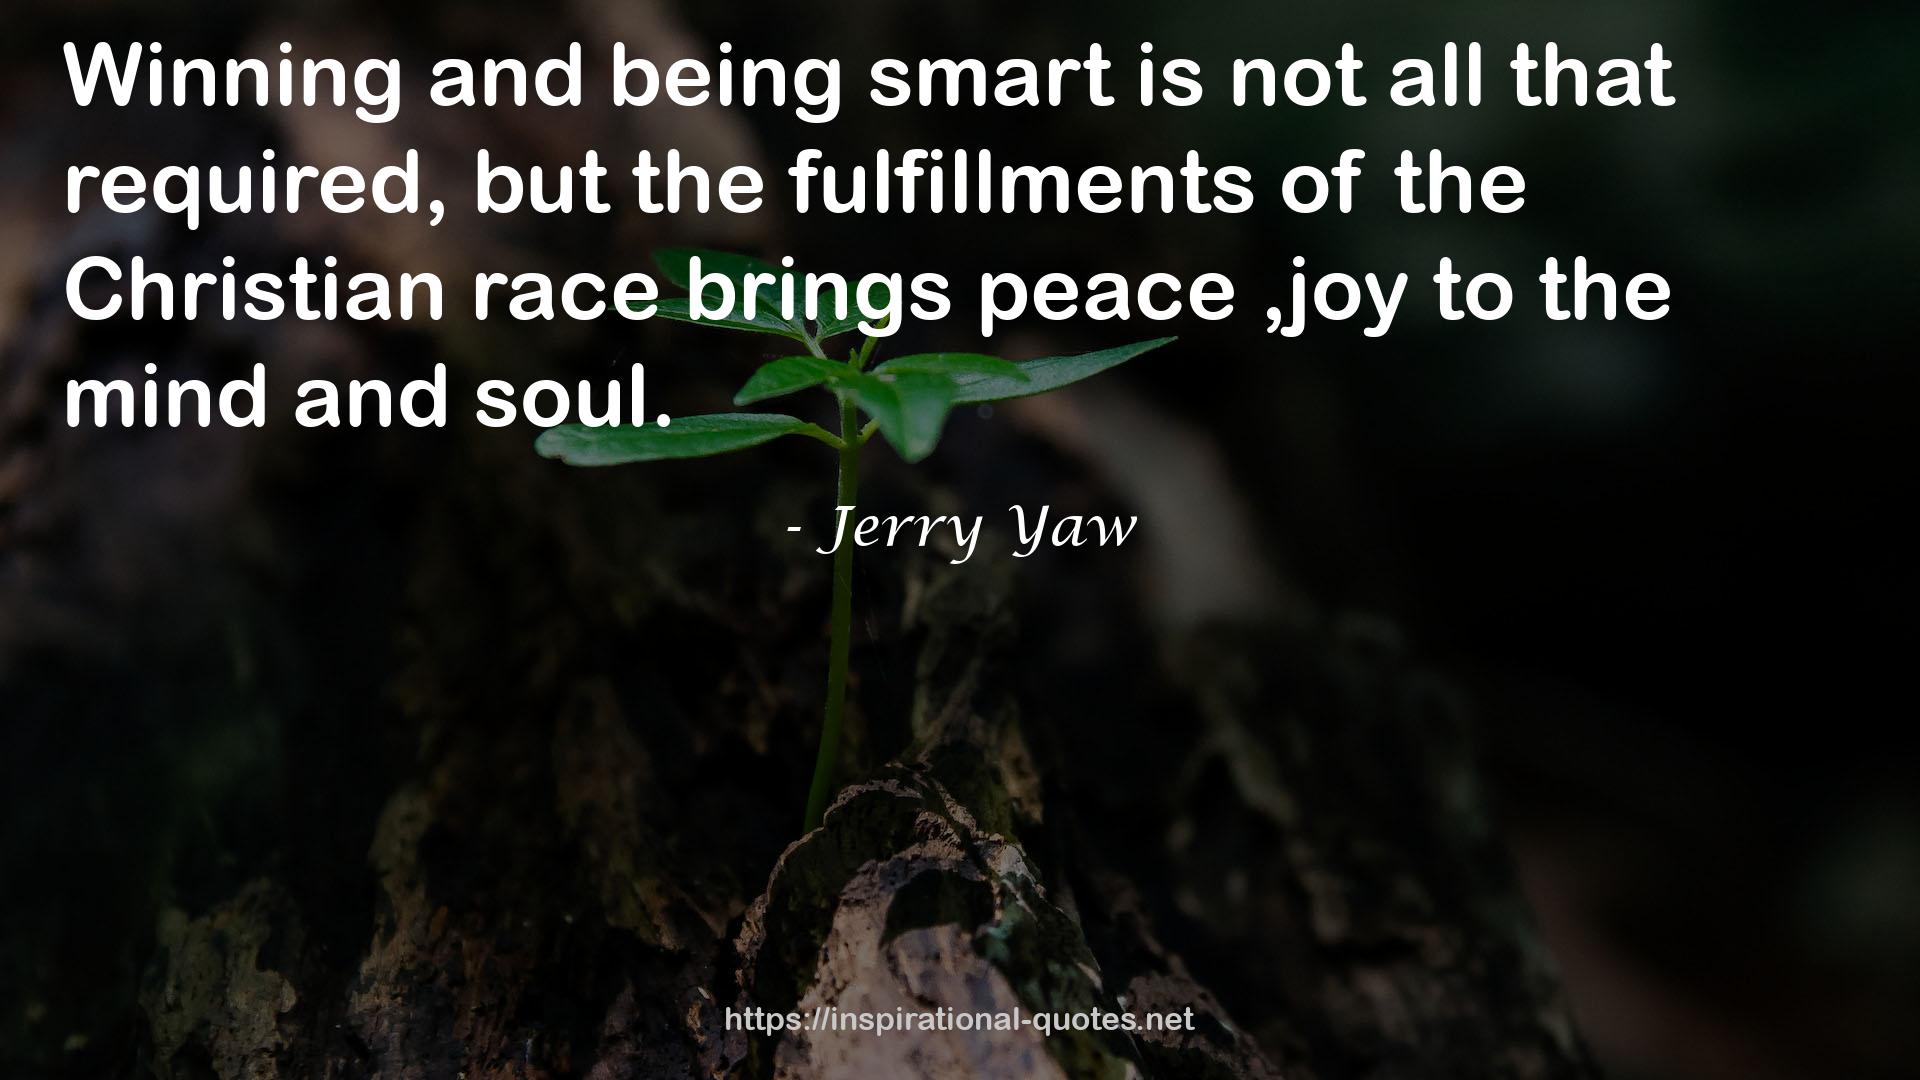 Jerry Yaw QUOTES